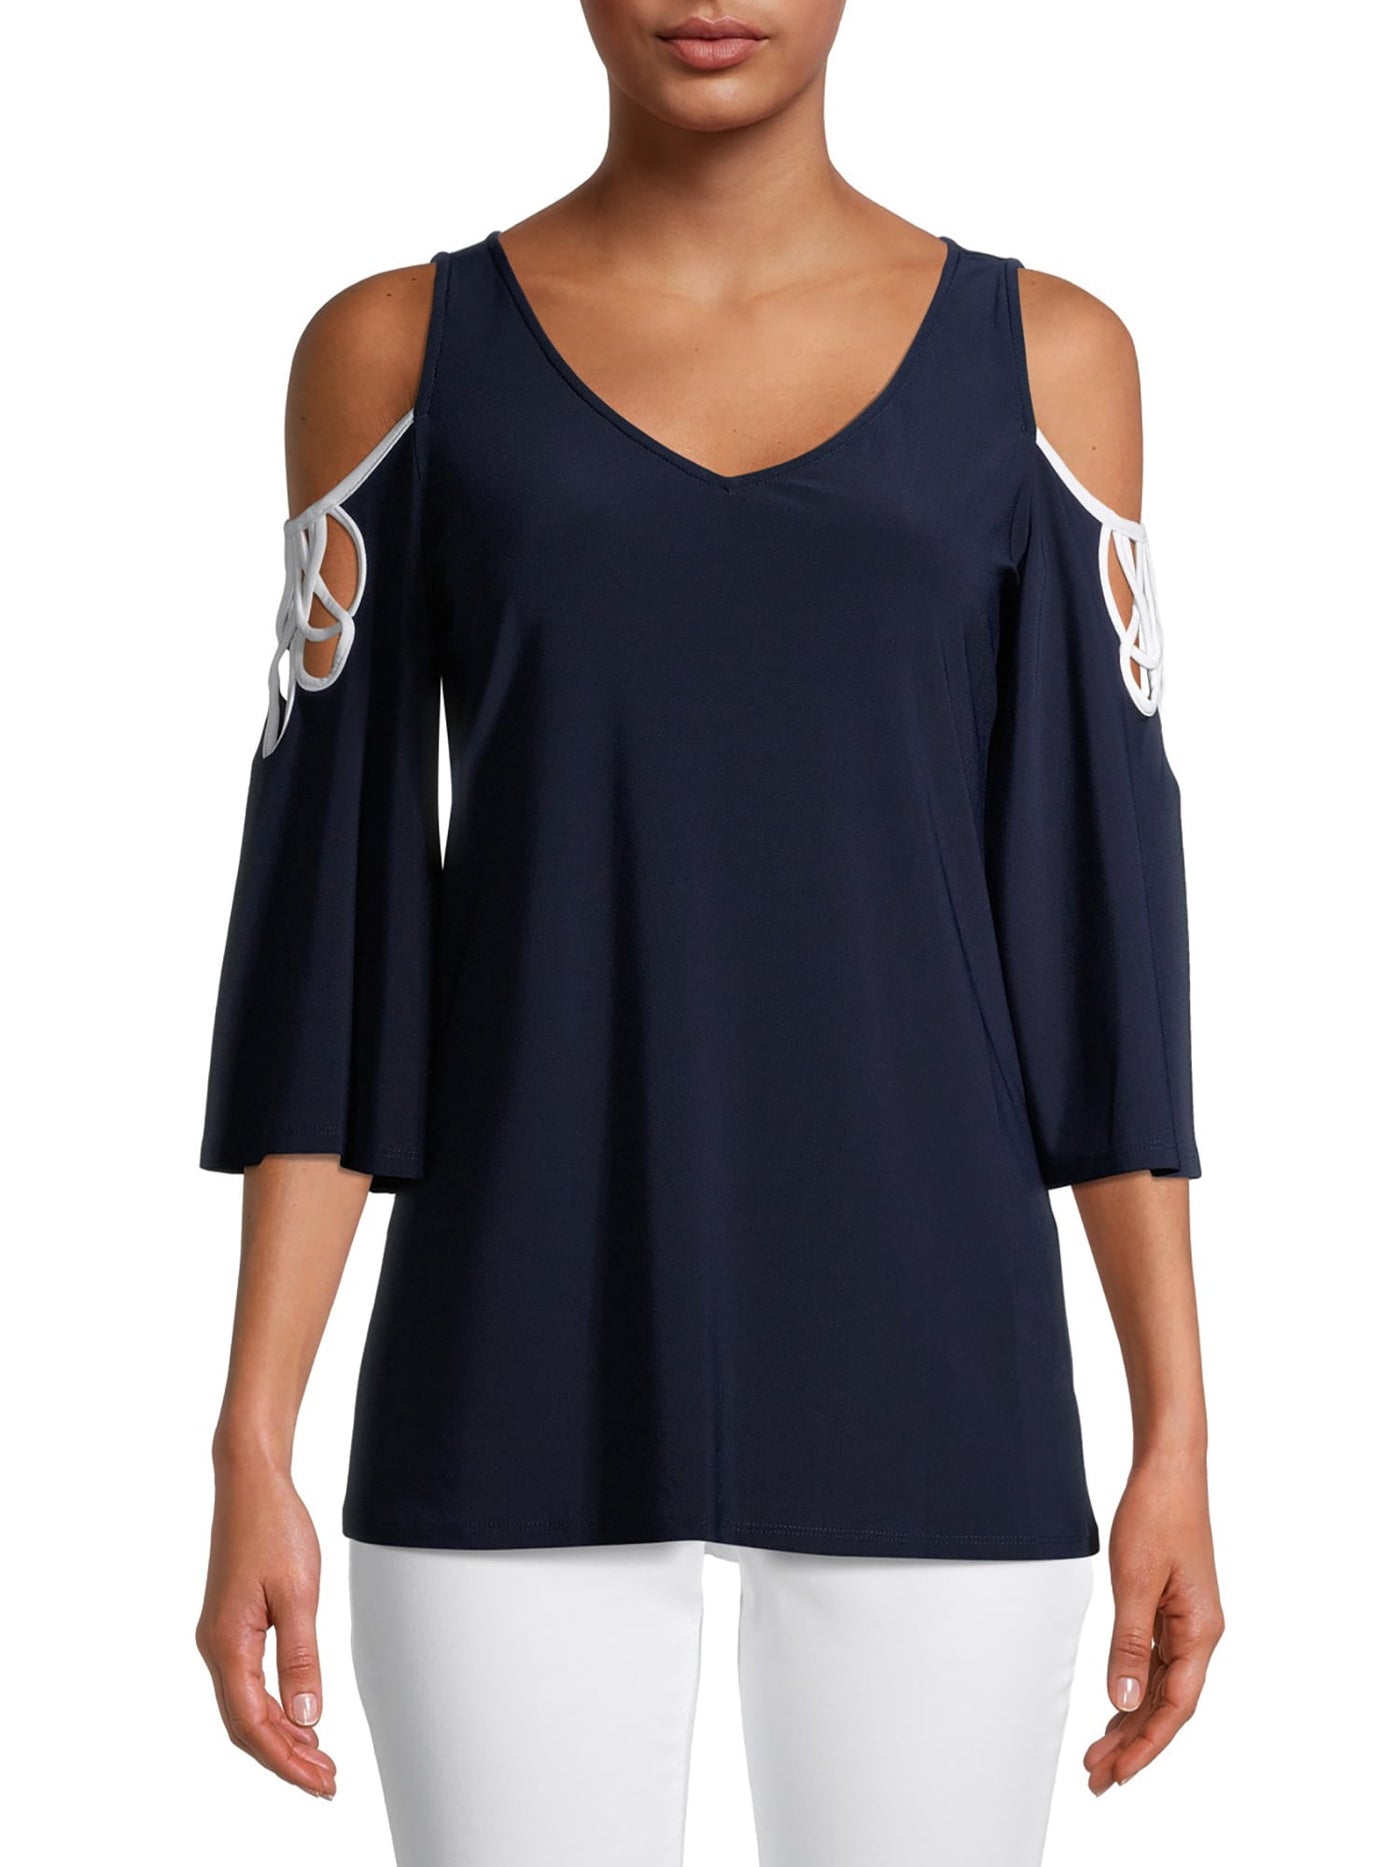 VINCE CAMUTO Womens Navy Cold Shoulder Cut Out 3/4 Sleeve V Neck Top M